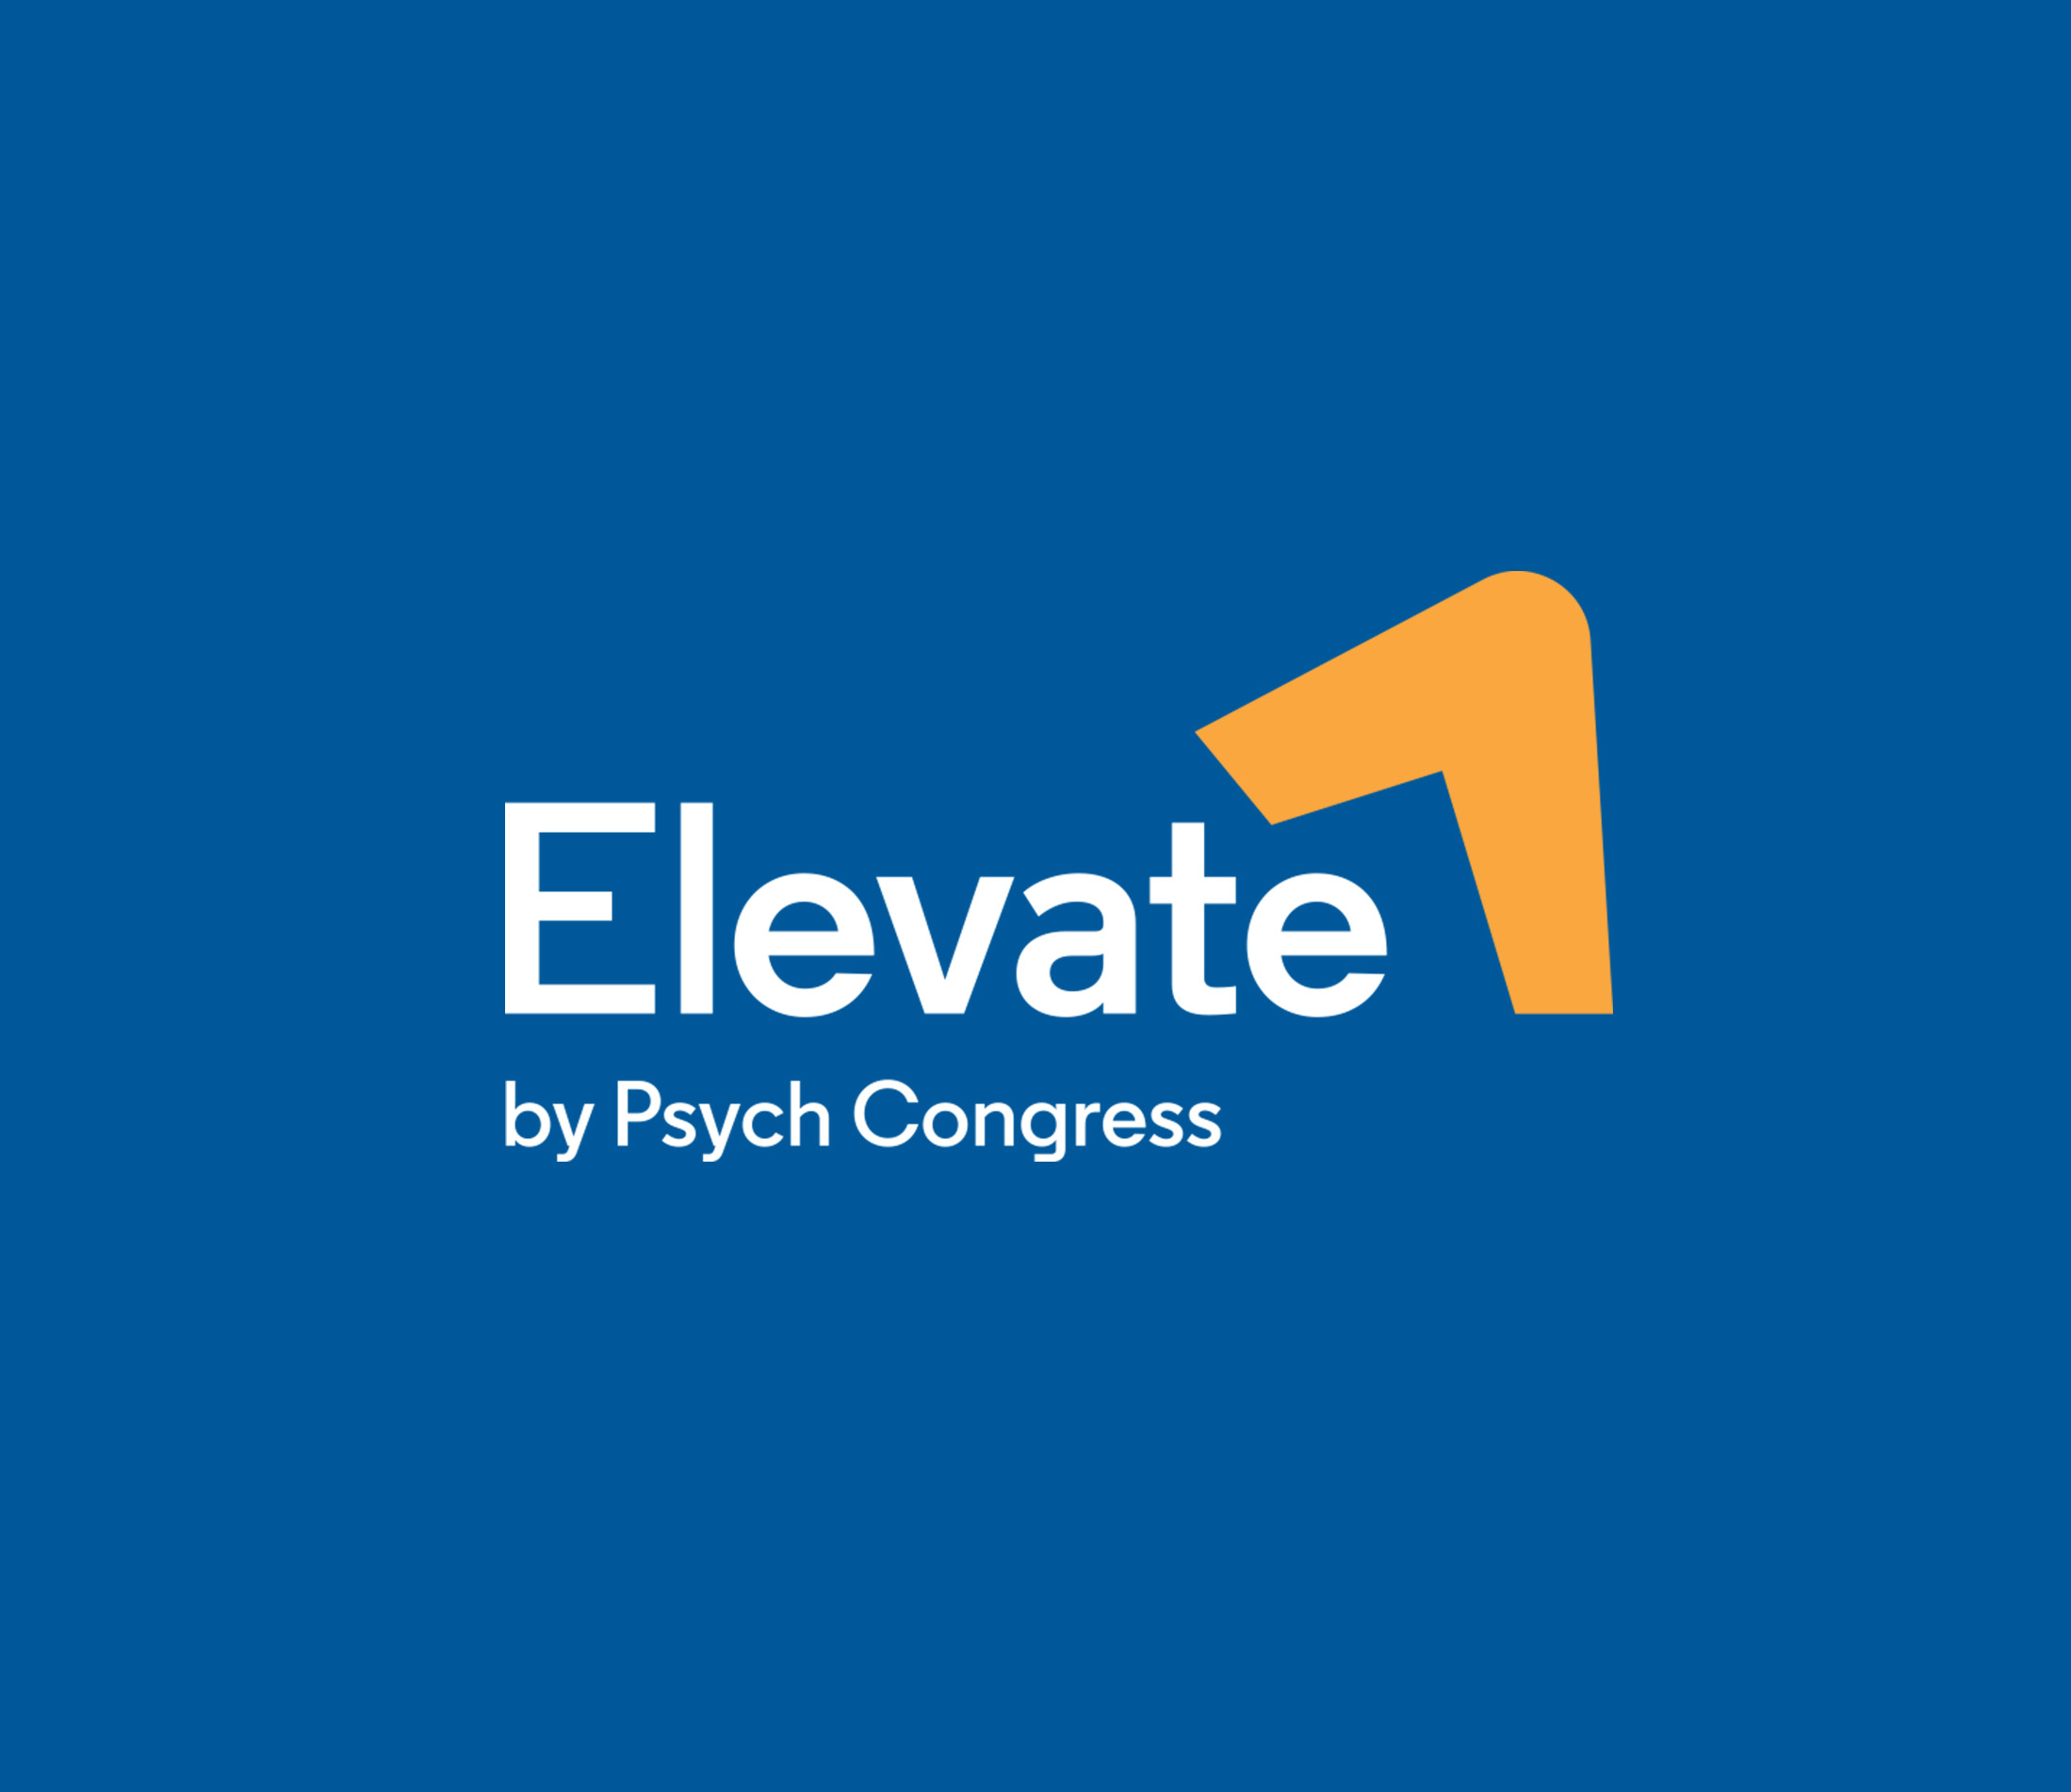 Elevate by Psych Congress Aims to Reshape Mental Health Care Through